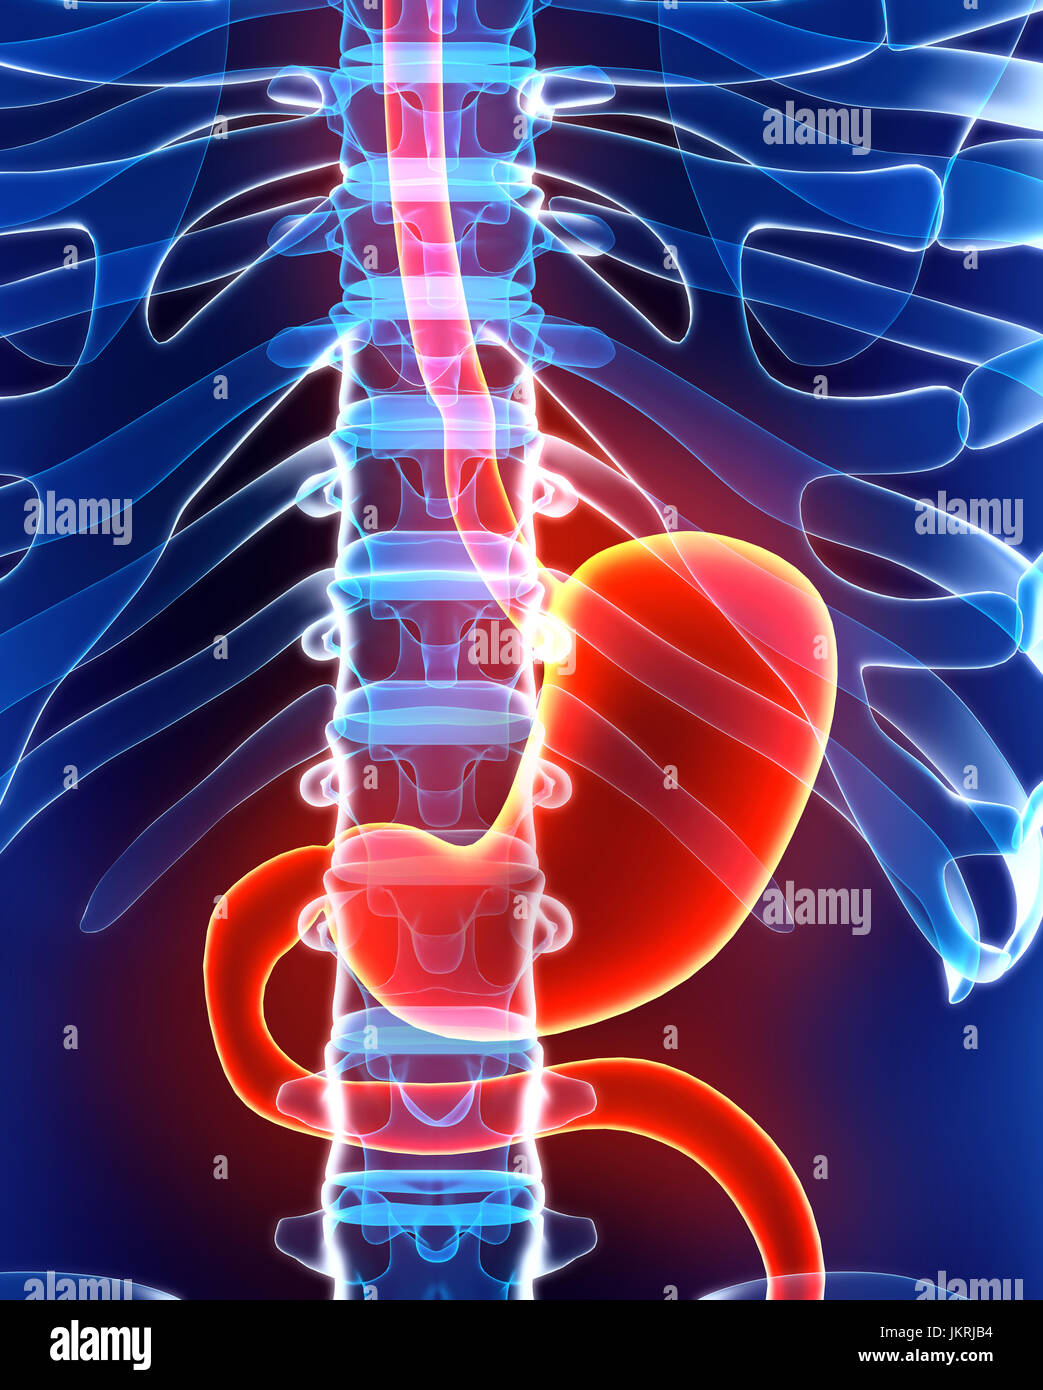 3D illustration of Stomach, Part of Digestive System, anatomy detail. Stock Photo